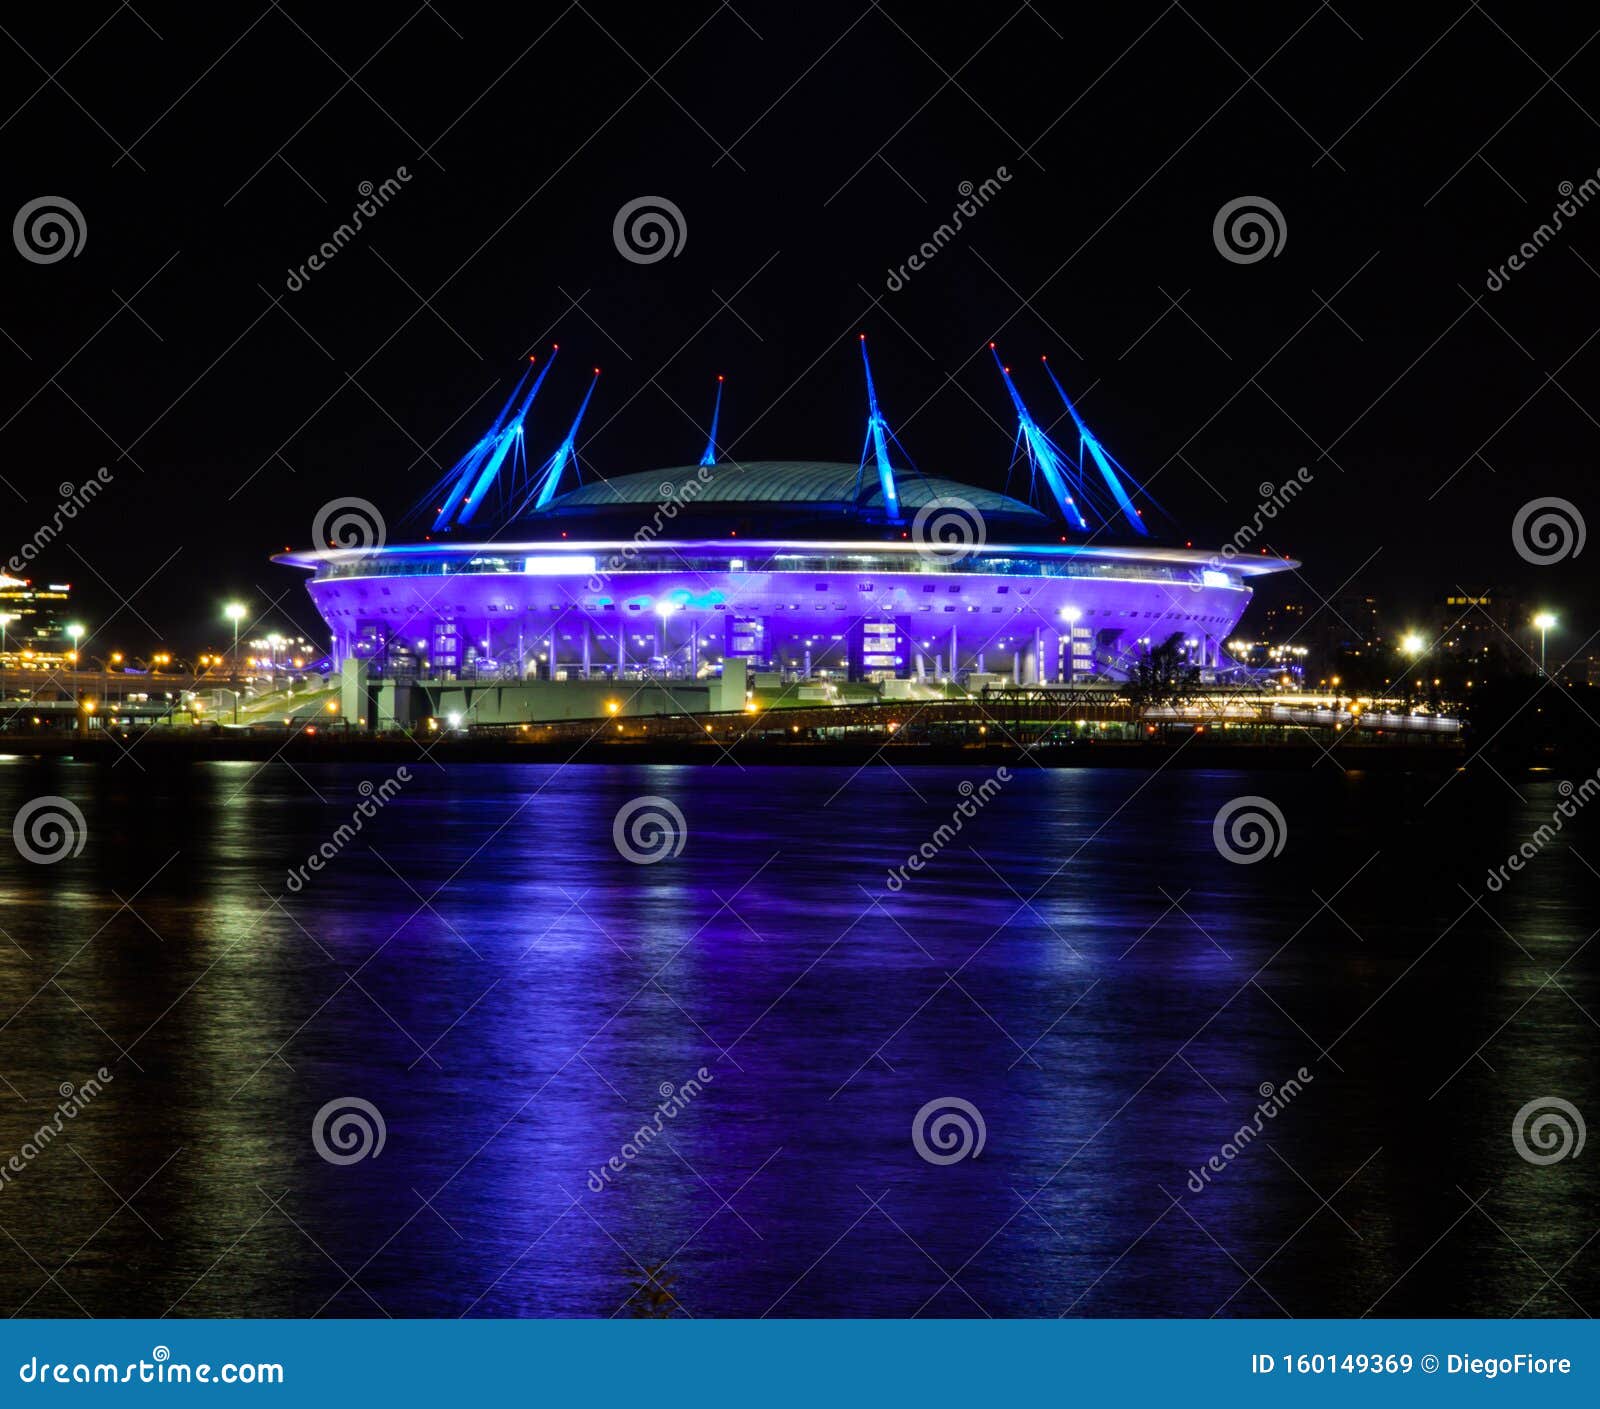 Gazprom Arena St Petersburg Russia Stock Image Image Of Building Home